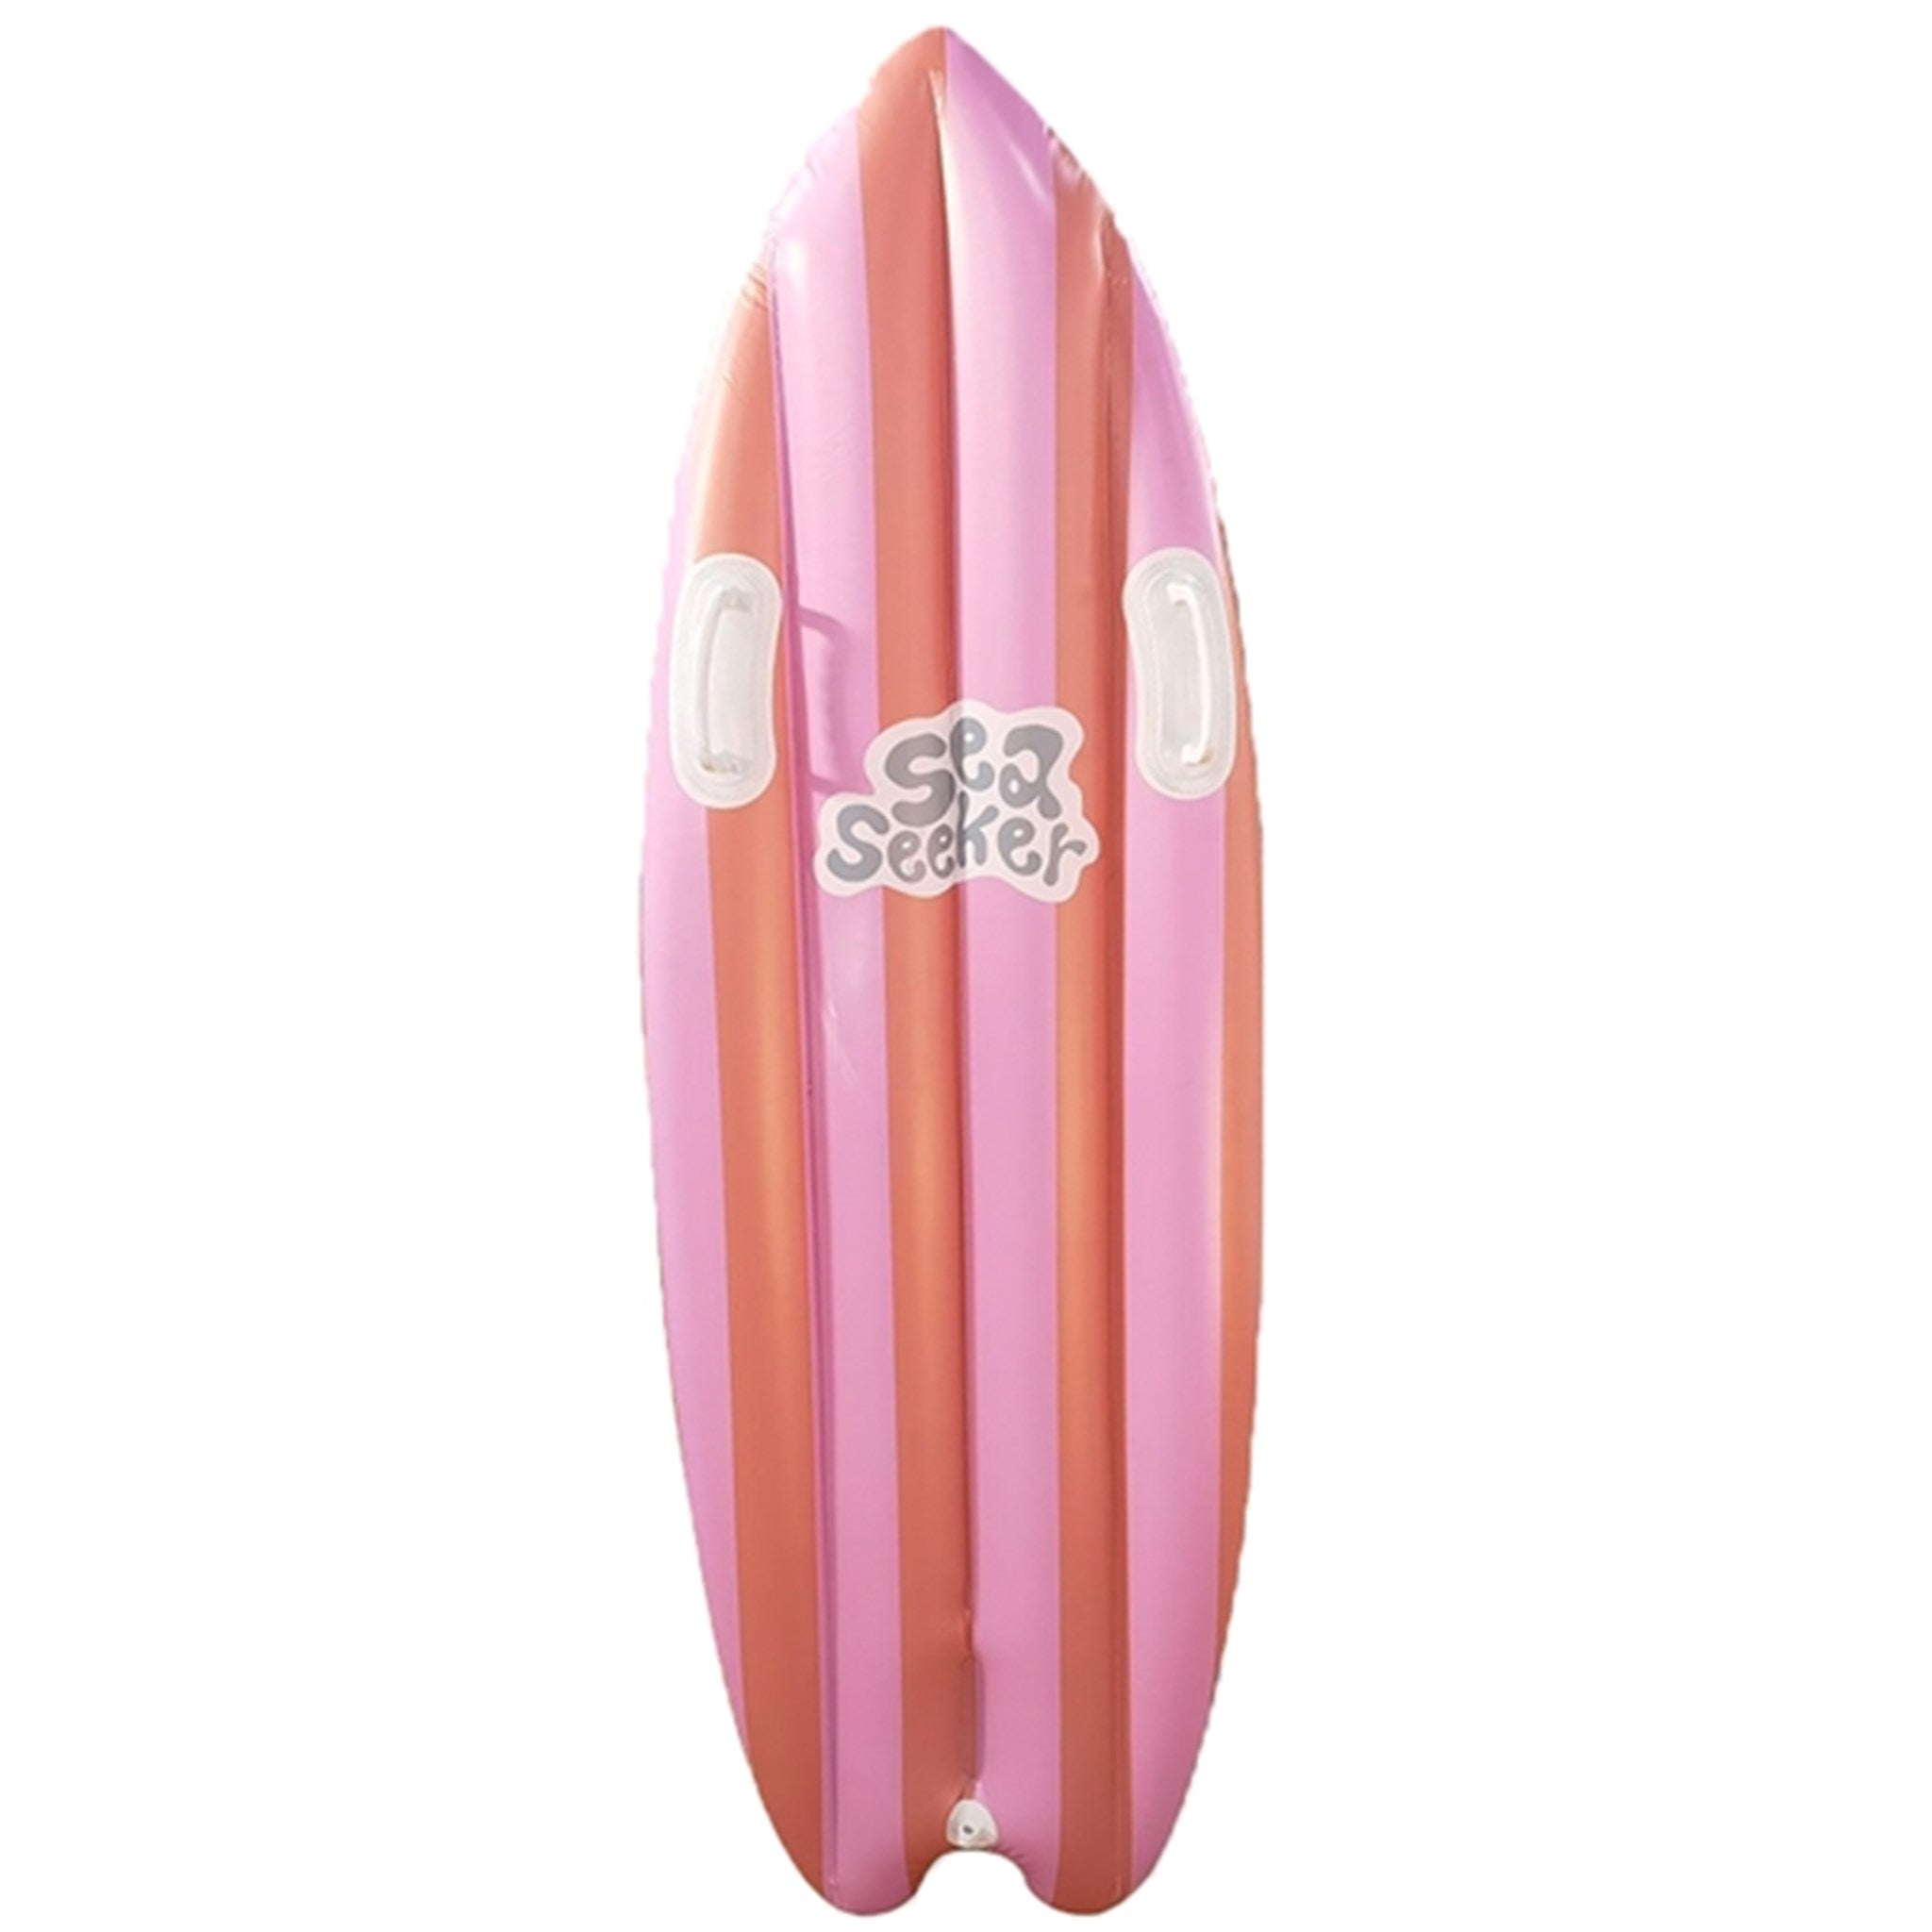 SunnyLife Ride With Me Surfboard Sea Seeker Strawberry